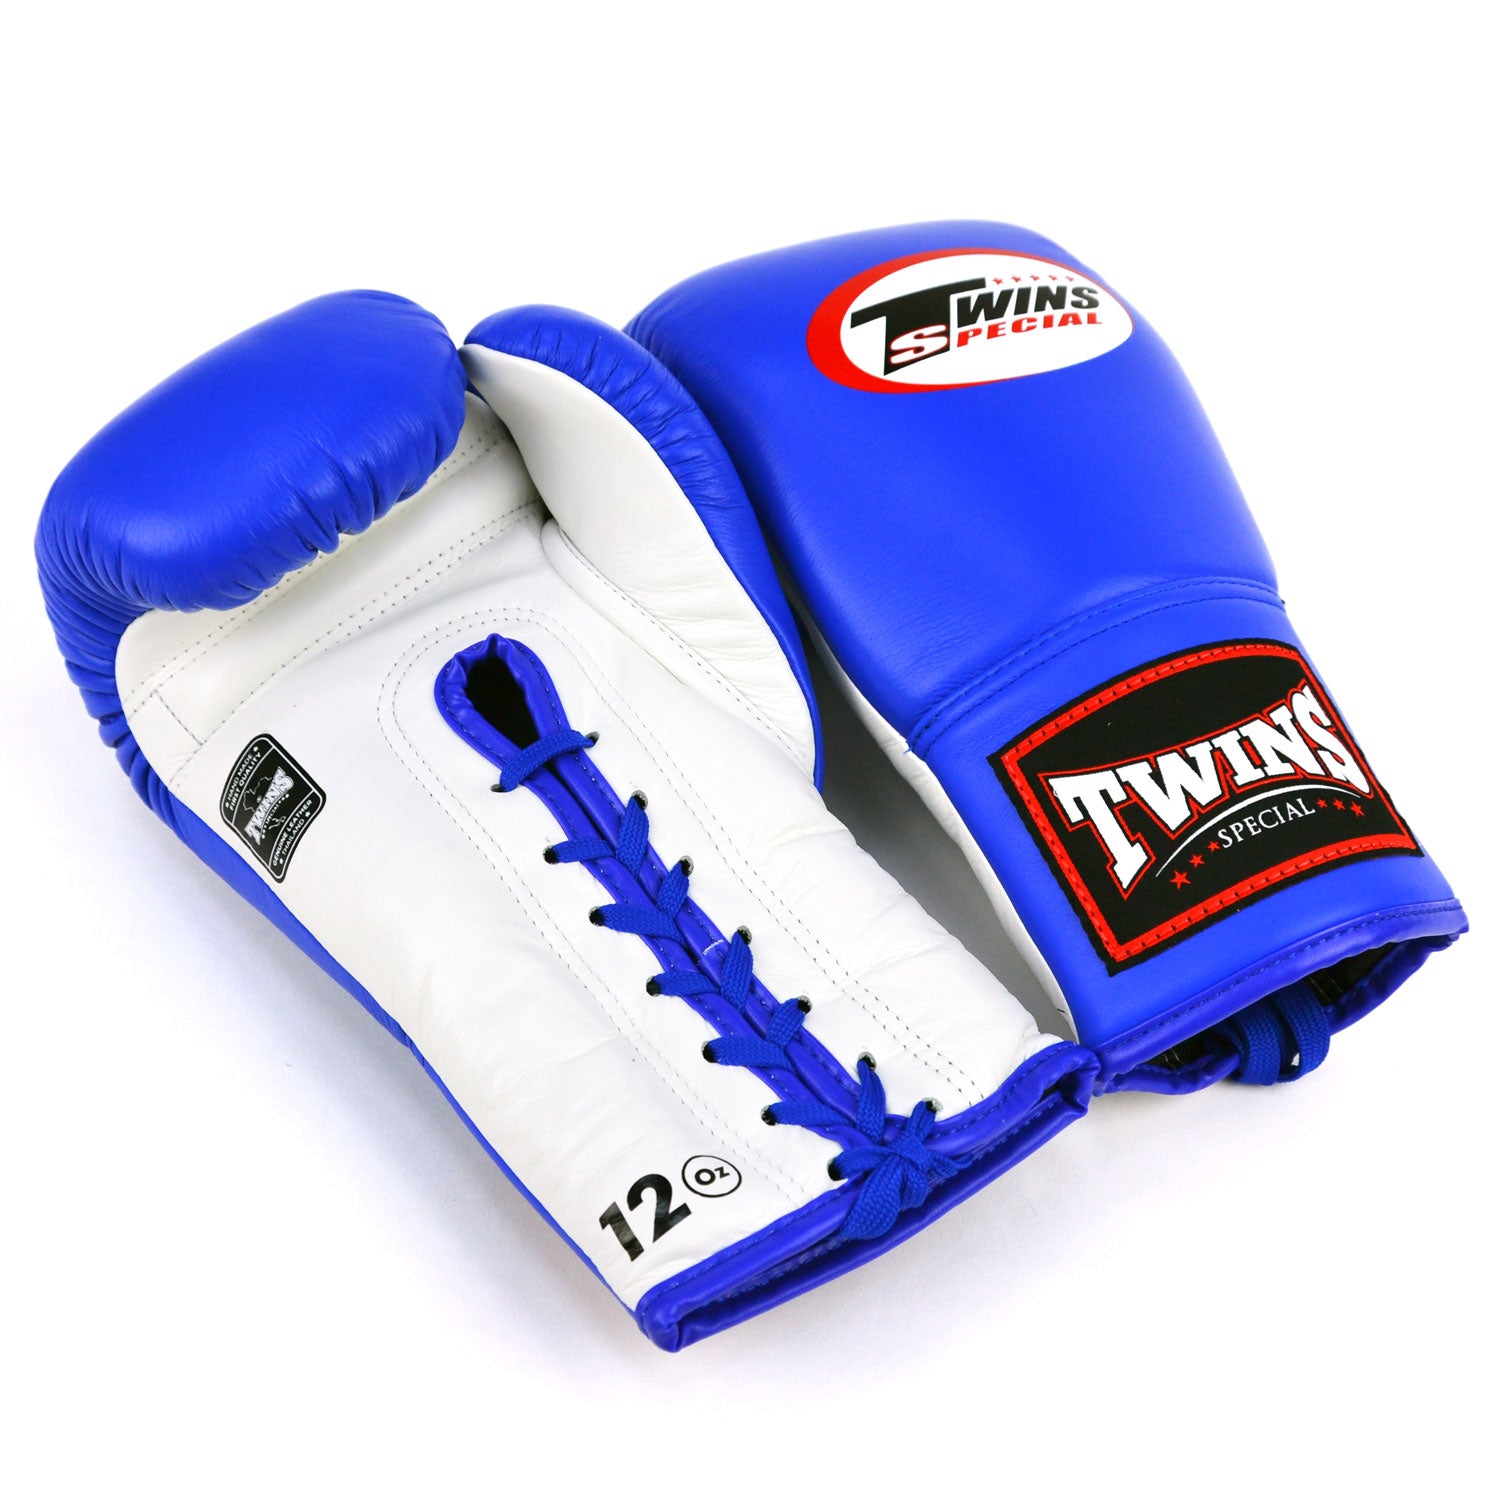 Twins Special Lace-up Boxing Gloves Twins Special